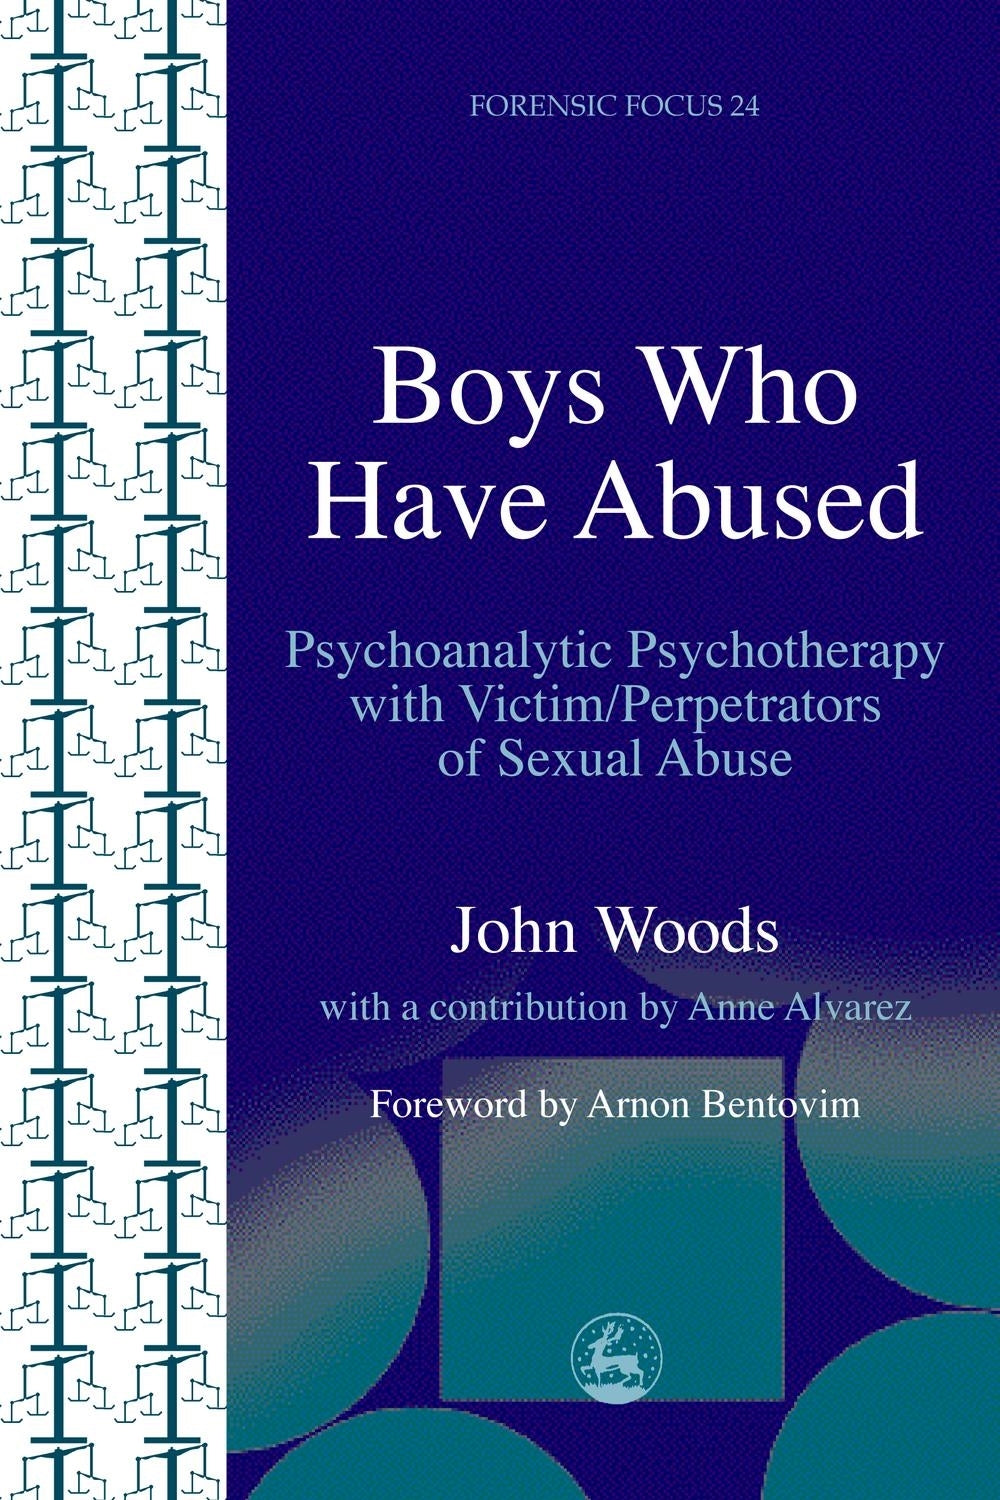 Boys Who Have Abused by Arnon Bentovim, John Woods